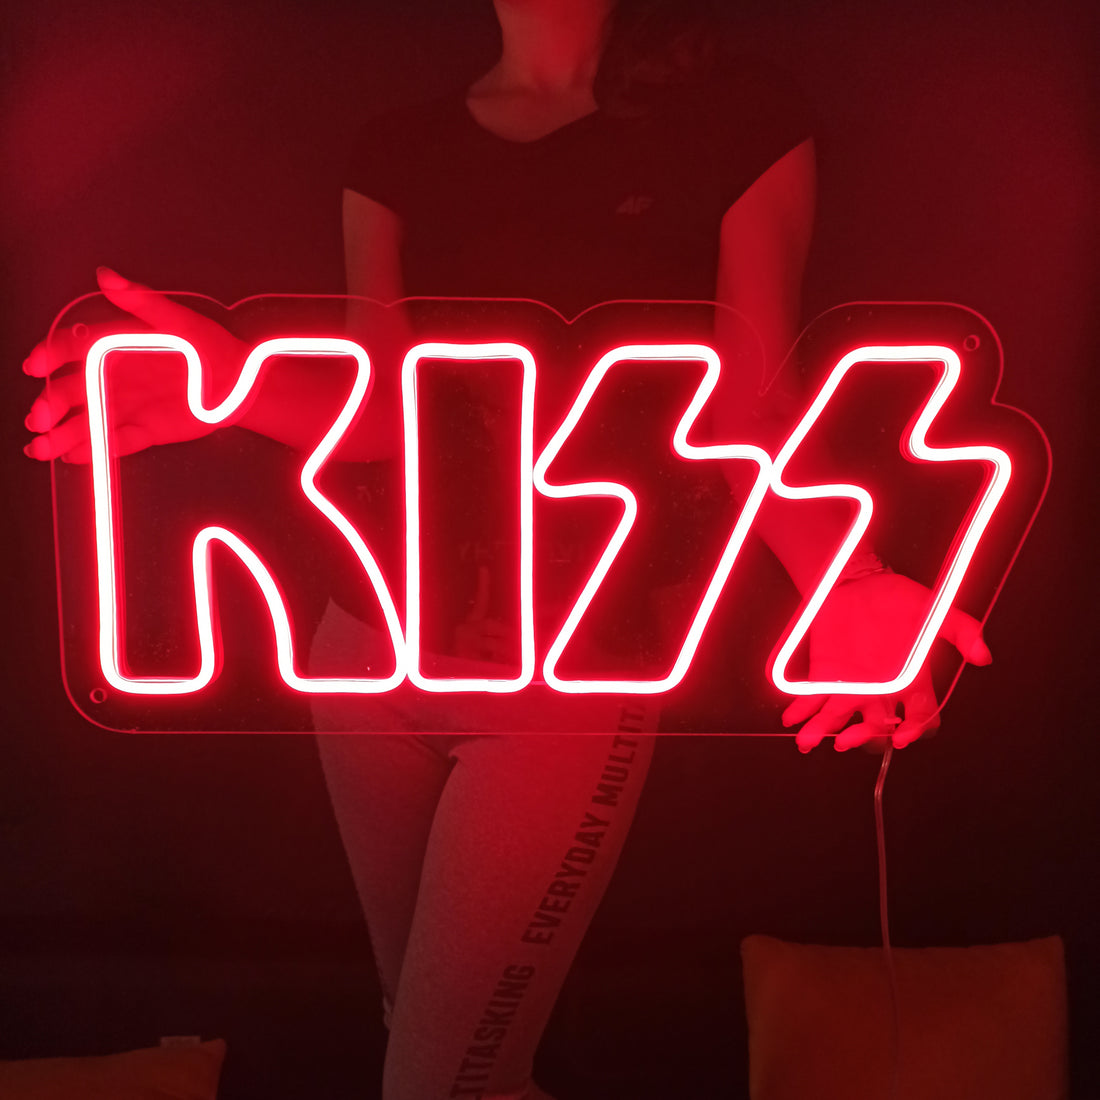 Neon sign for the rehearsal room "Kiss"